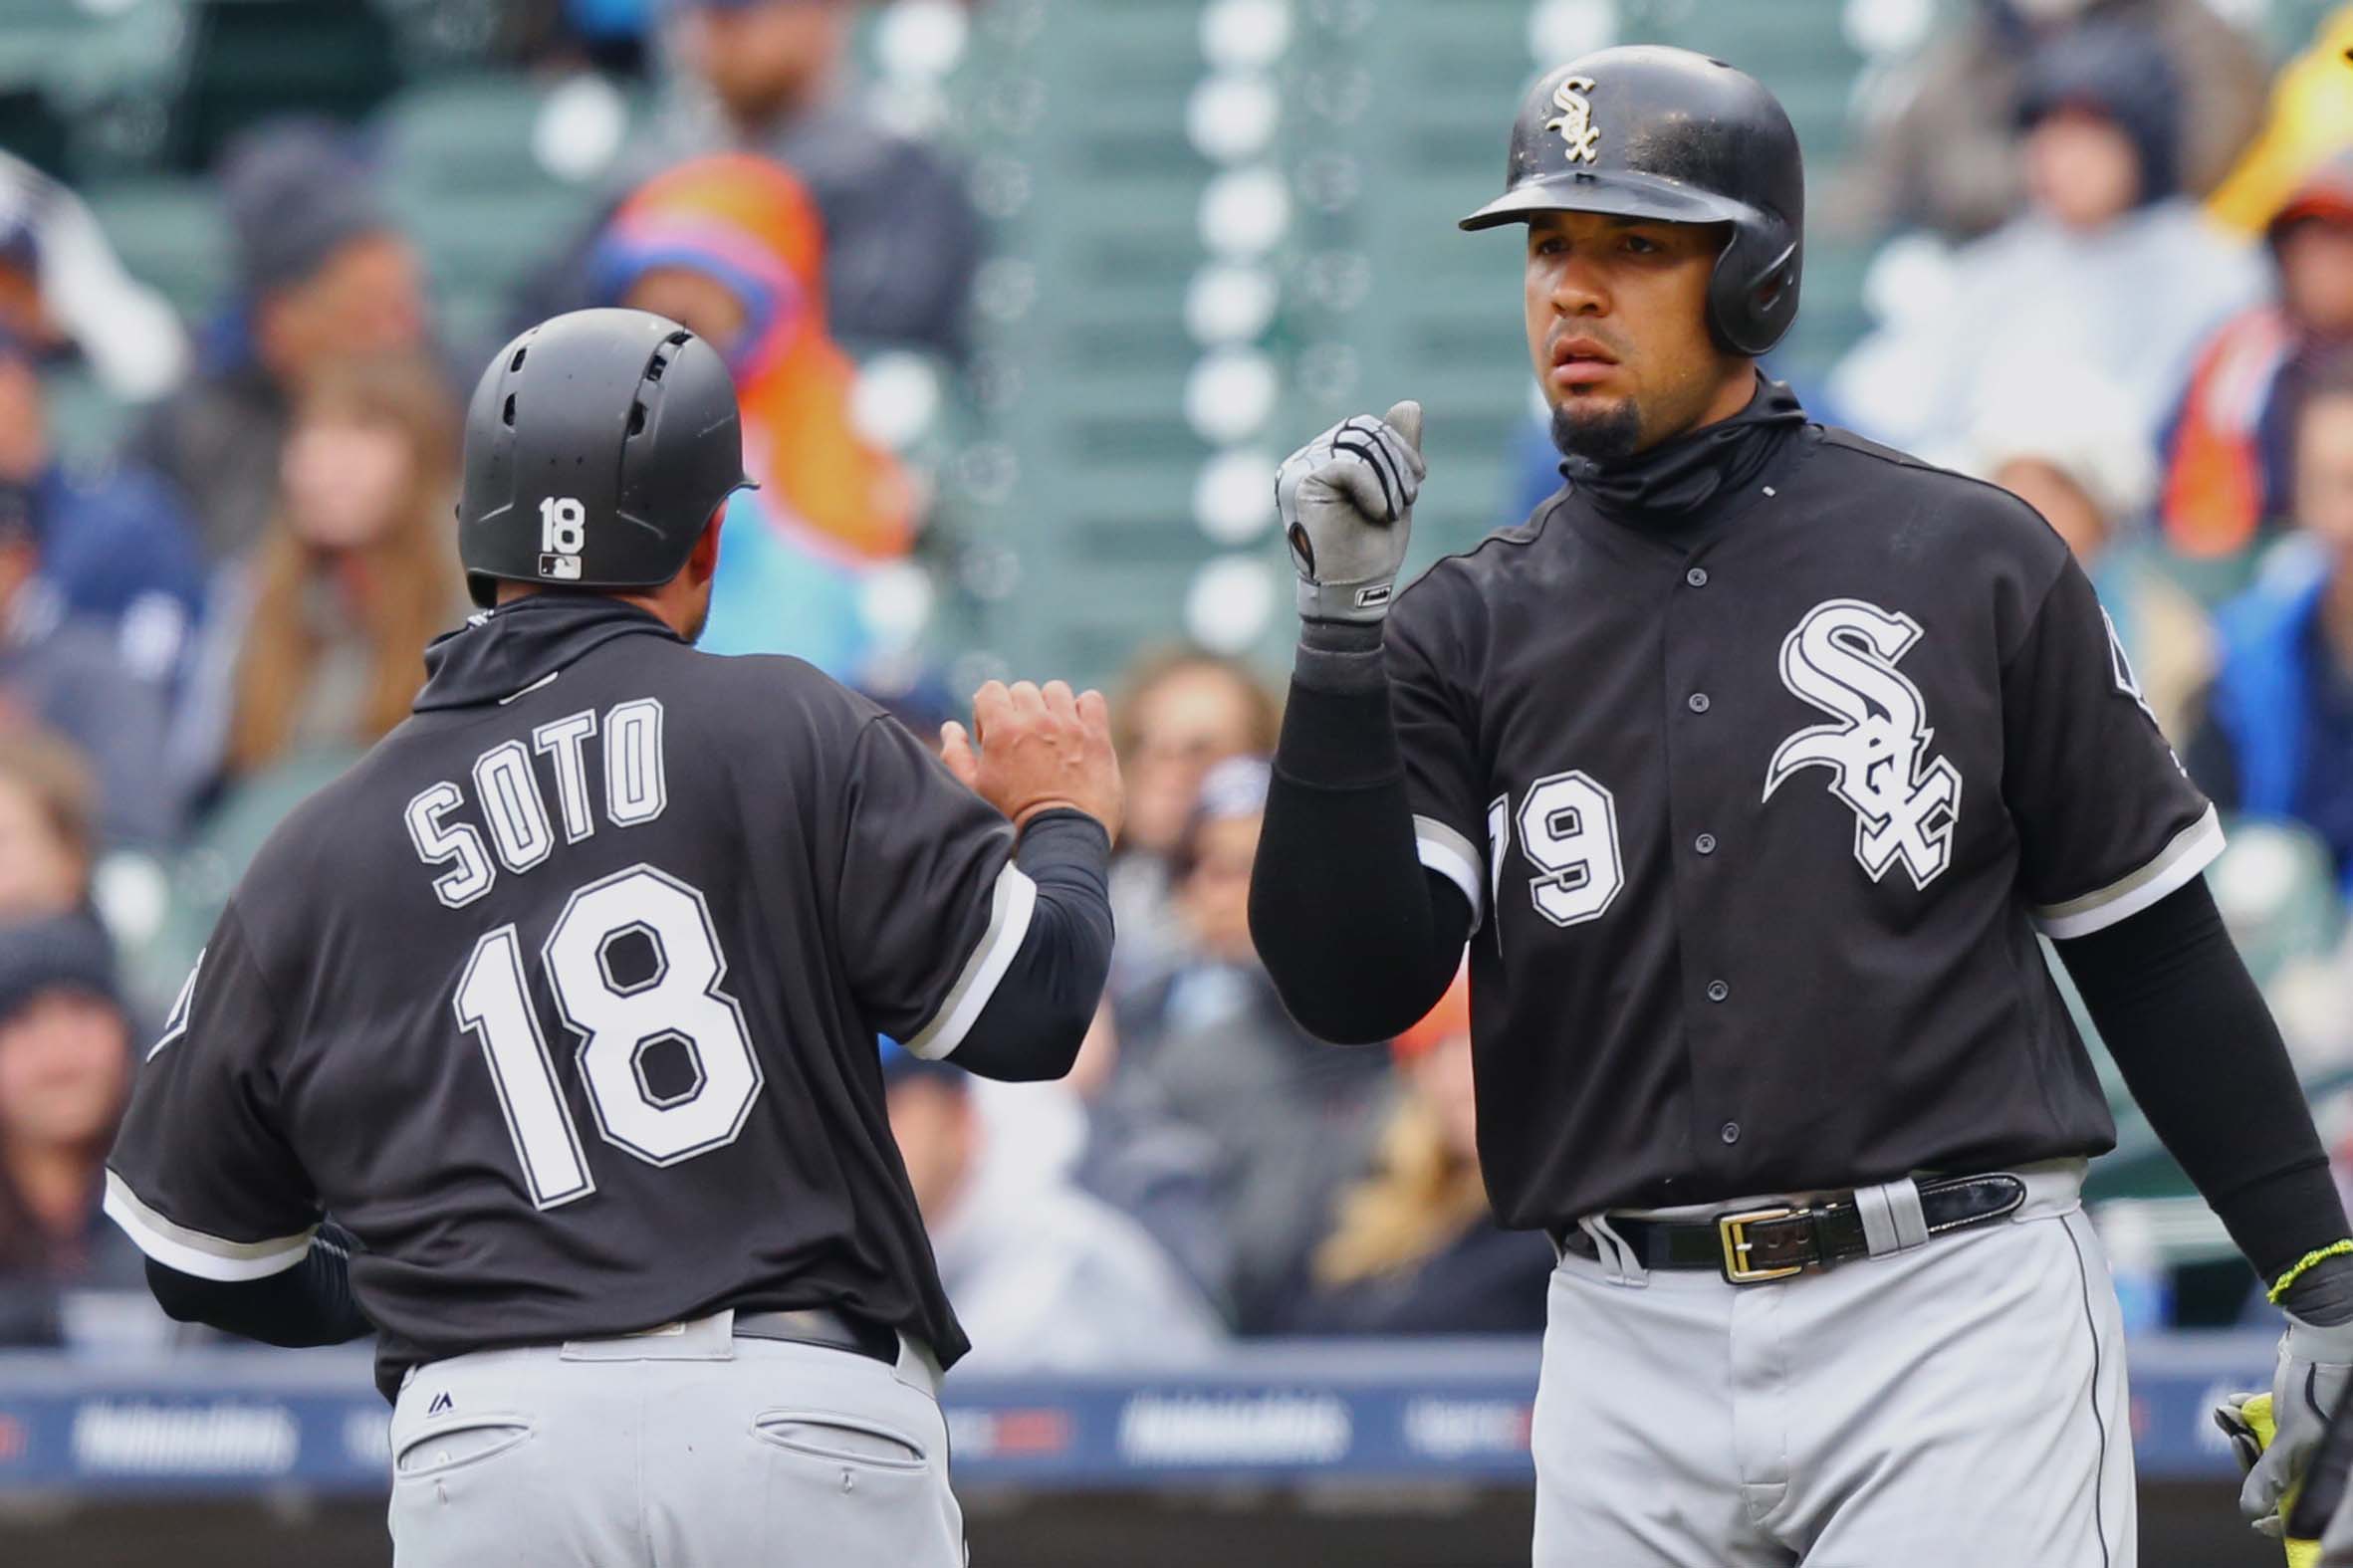 Apr 30, 2017; Detroit, MI, USA; Chicago White Sox catcher Geovany Soto (18) reacts to scoring a run with teammate first baseman Jose Abreu (79) in the fifth inning at Comerica Park. Mandatory Credit: Aaron Doster-USA TODAY Sports